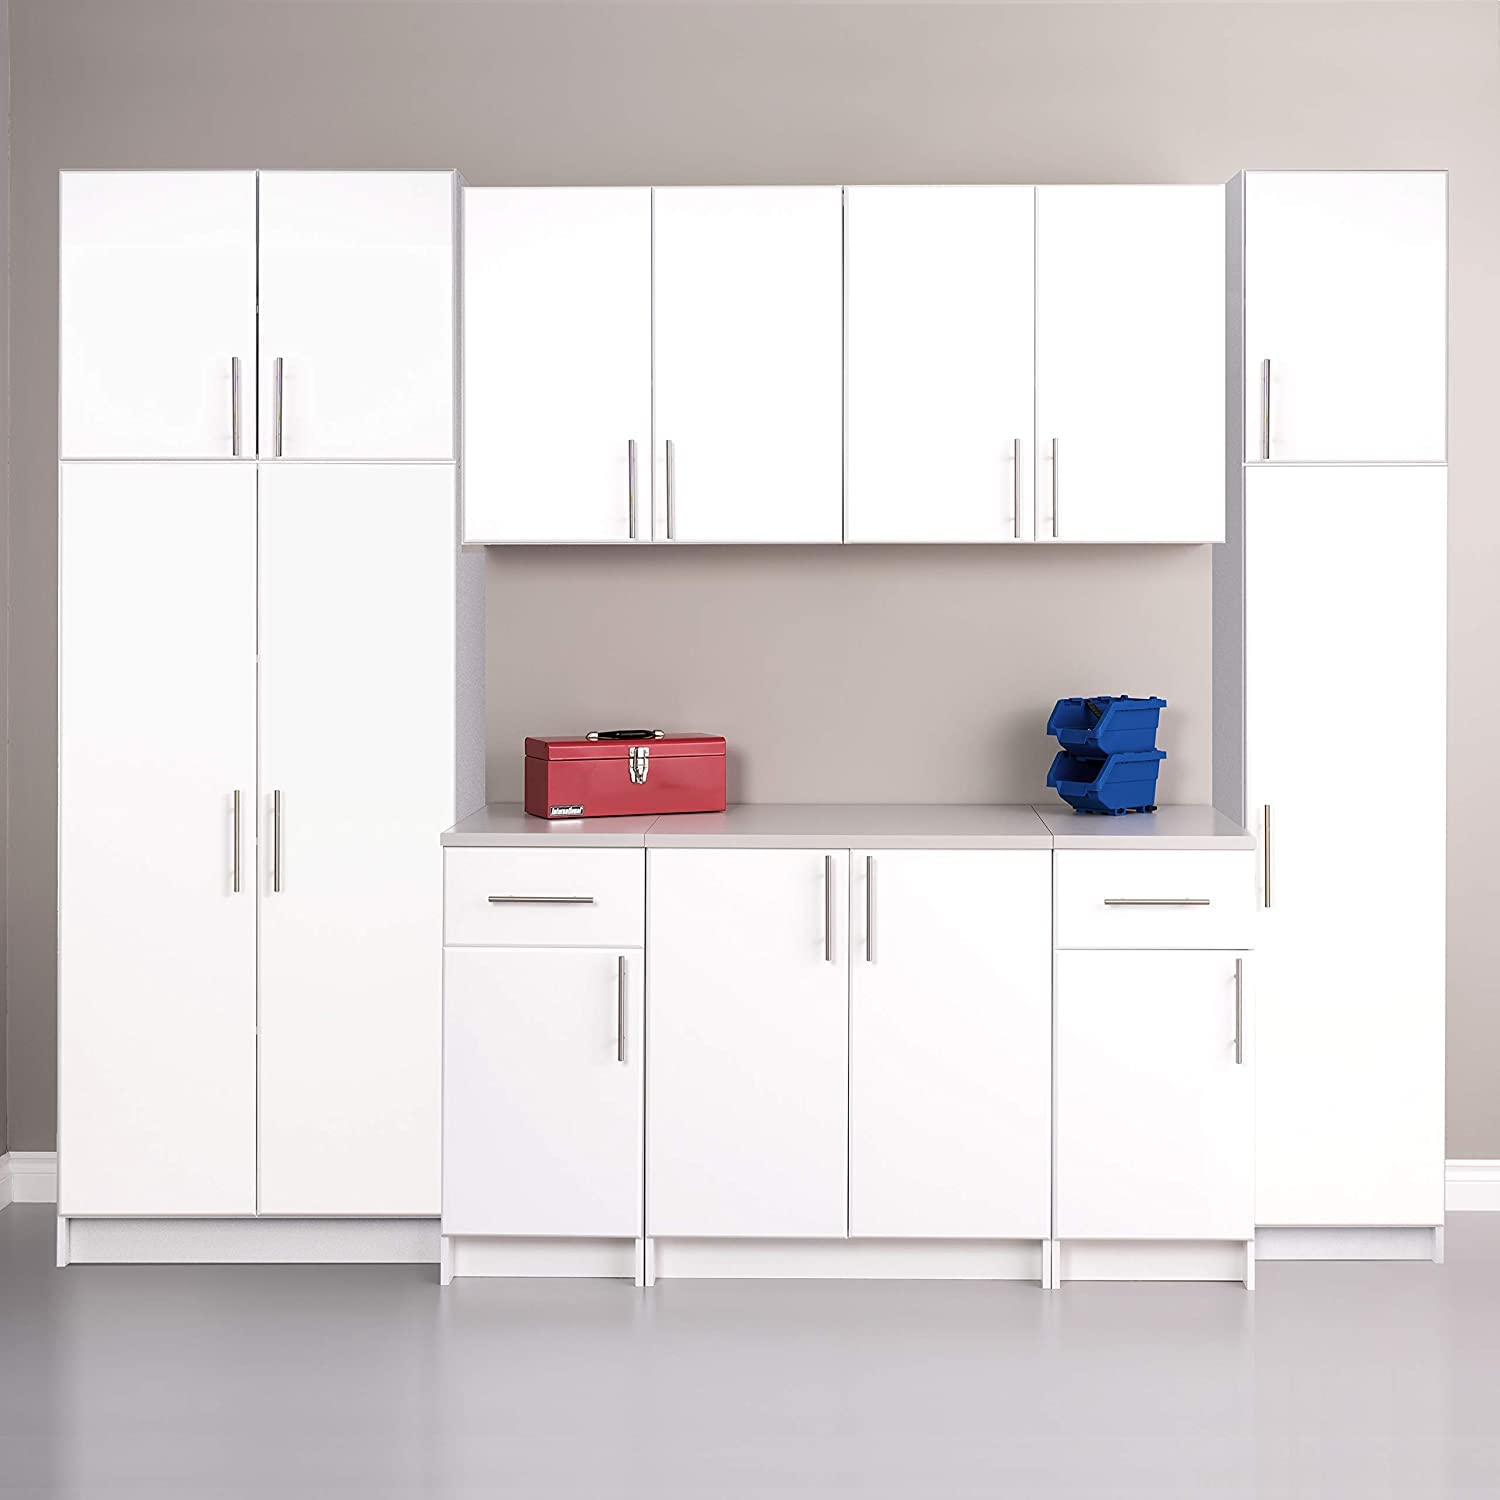 Pemberly Row 32" Wall Mount Cabinet, Wall Storage Cabinet with 2 Doors and One Shlef in White